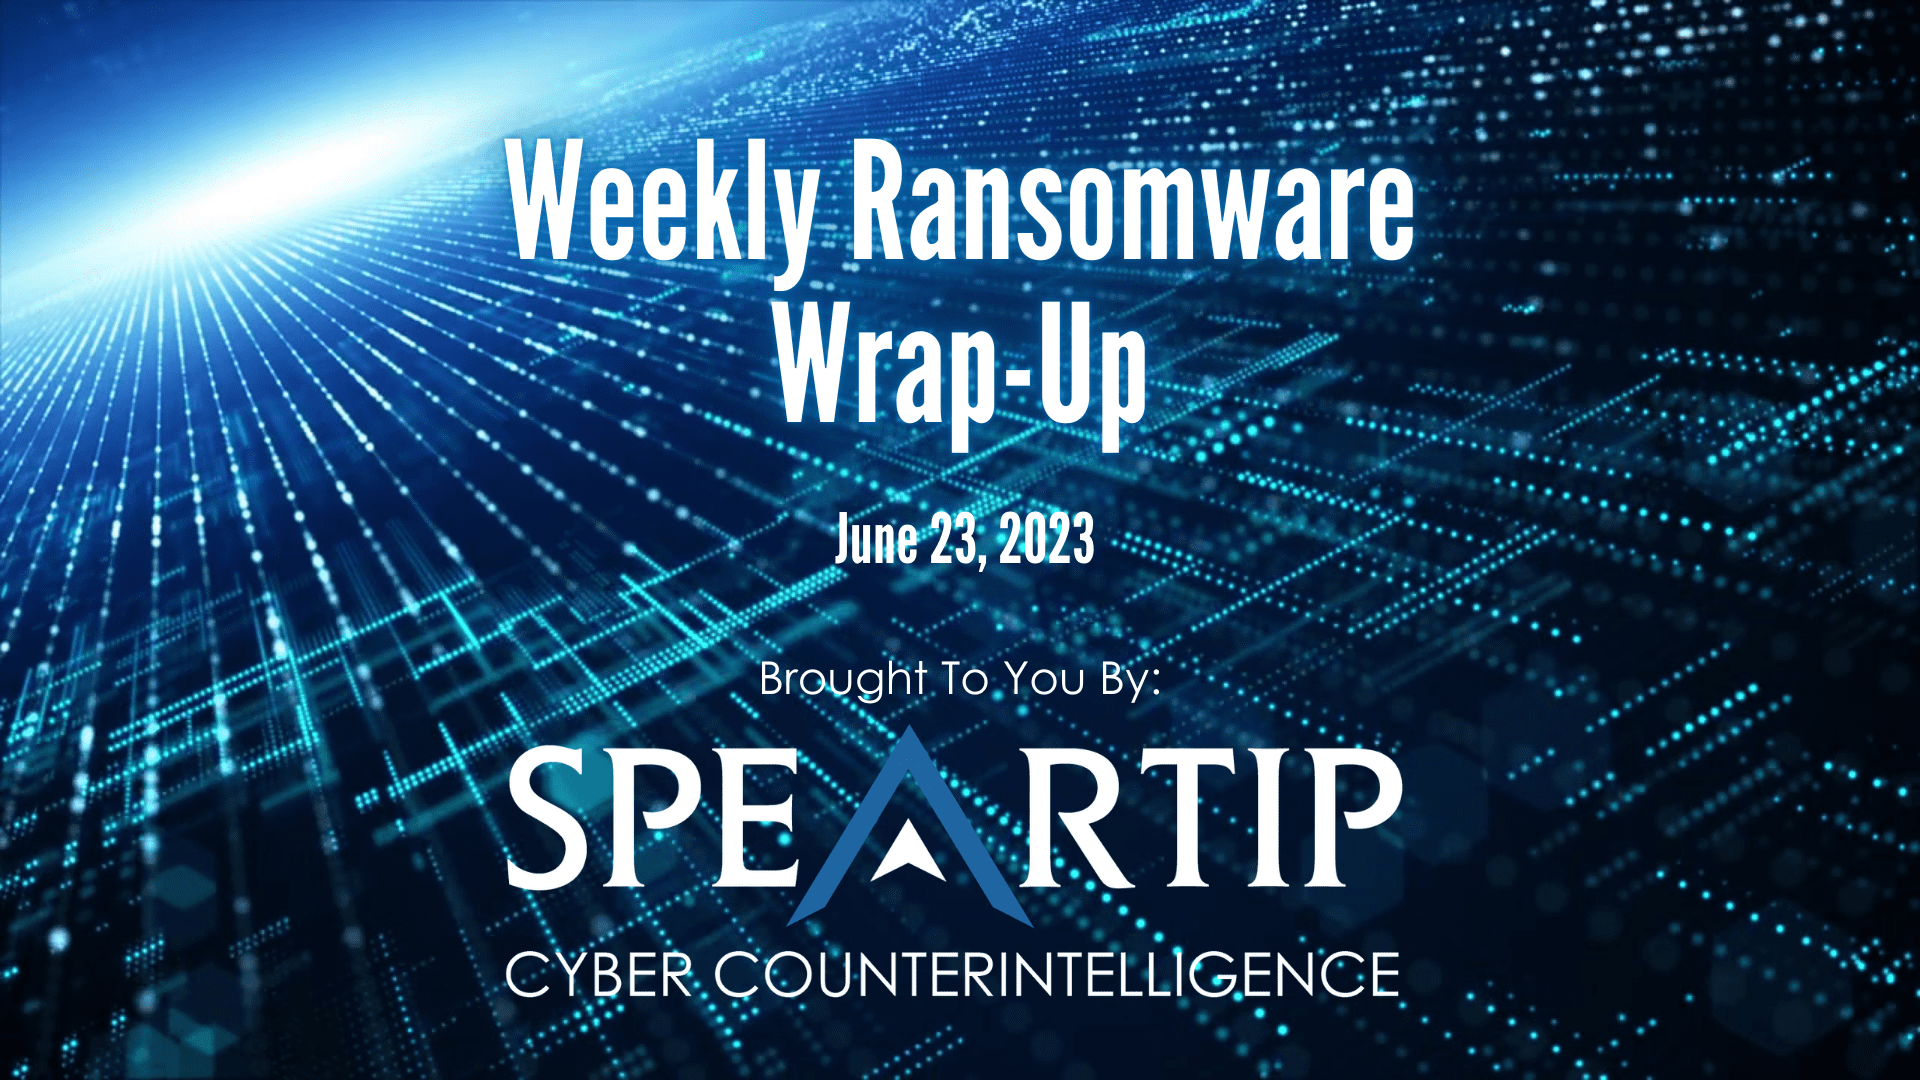 June-23-2023-Weekly Ransomware Wrap-up